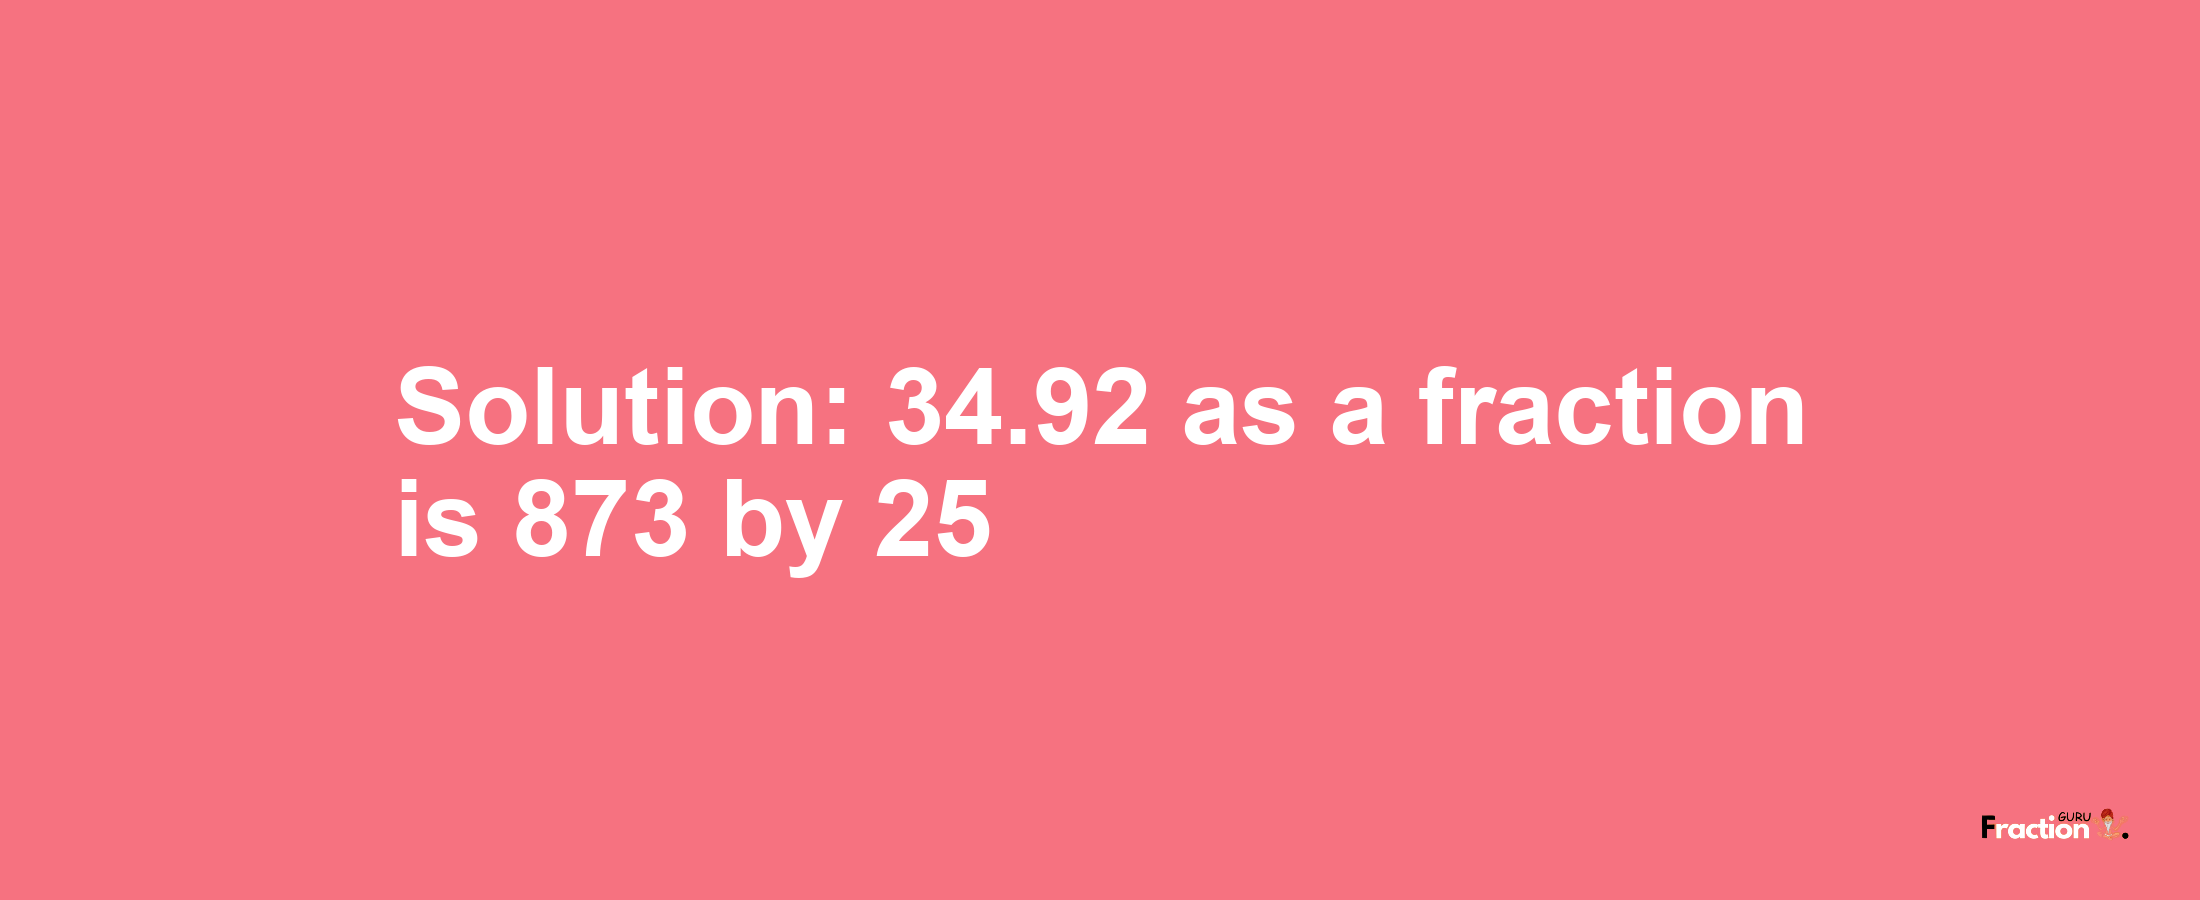 Solution:34.92 as a fraction is 873/25